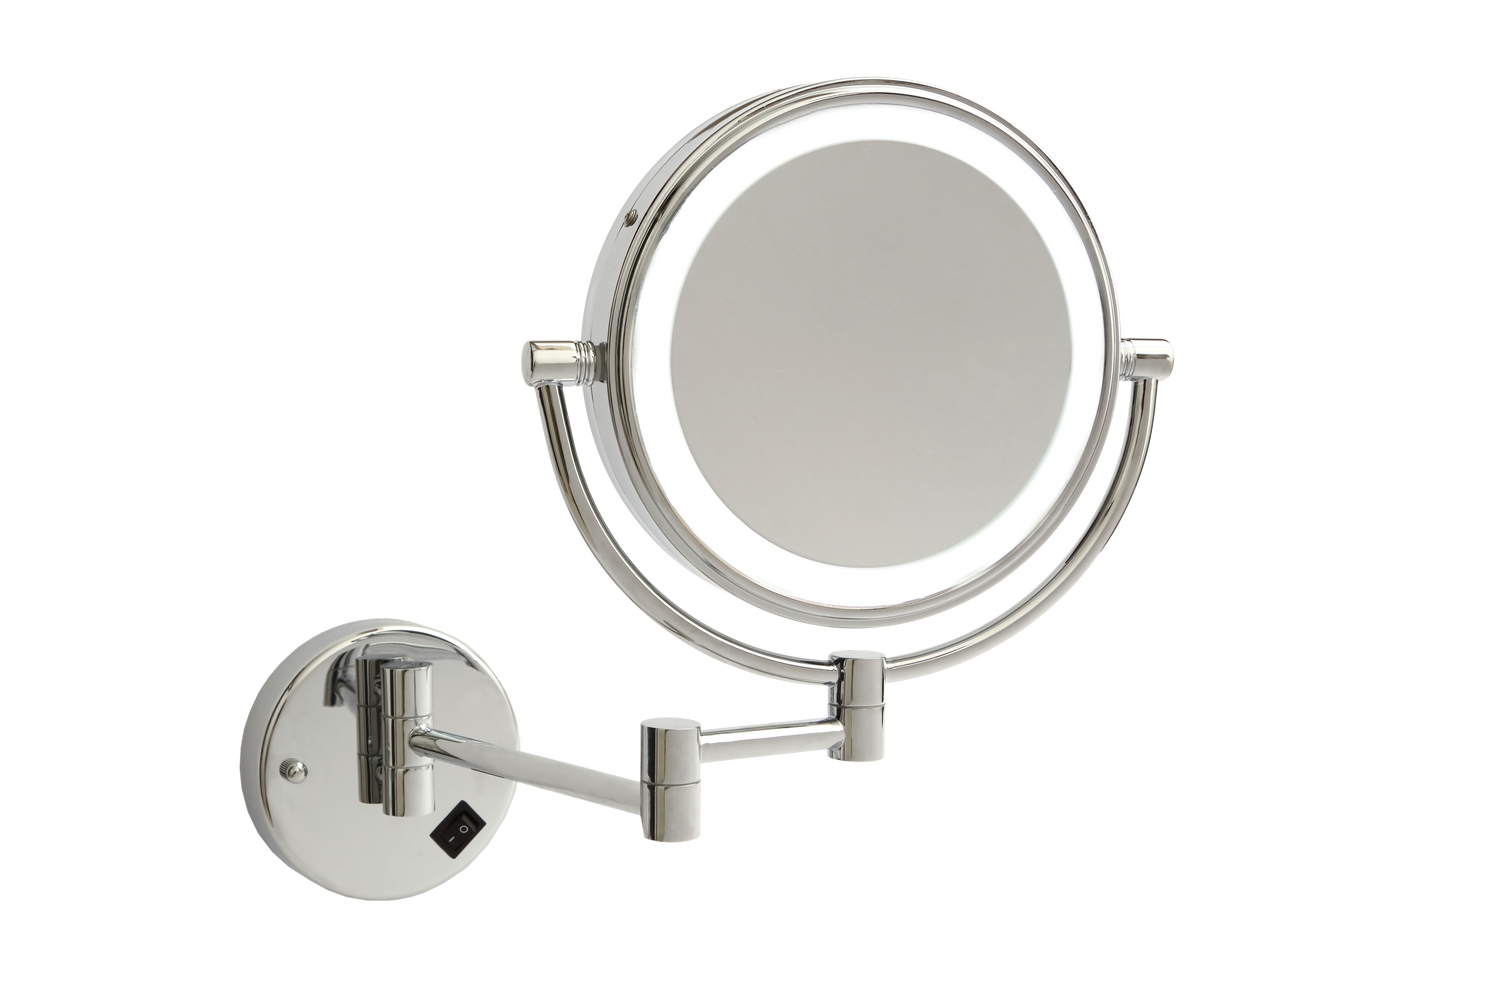 Thermogroup 1 & 5x Magnification Mirror with Light, LED Cool